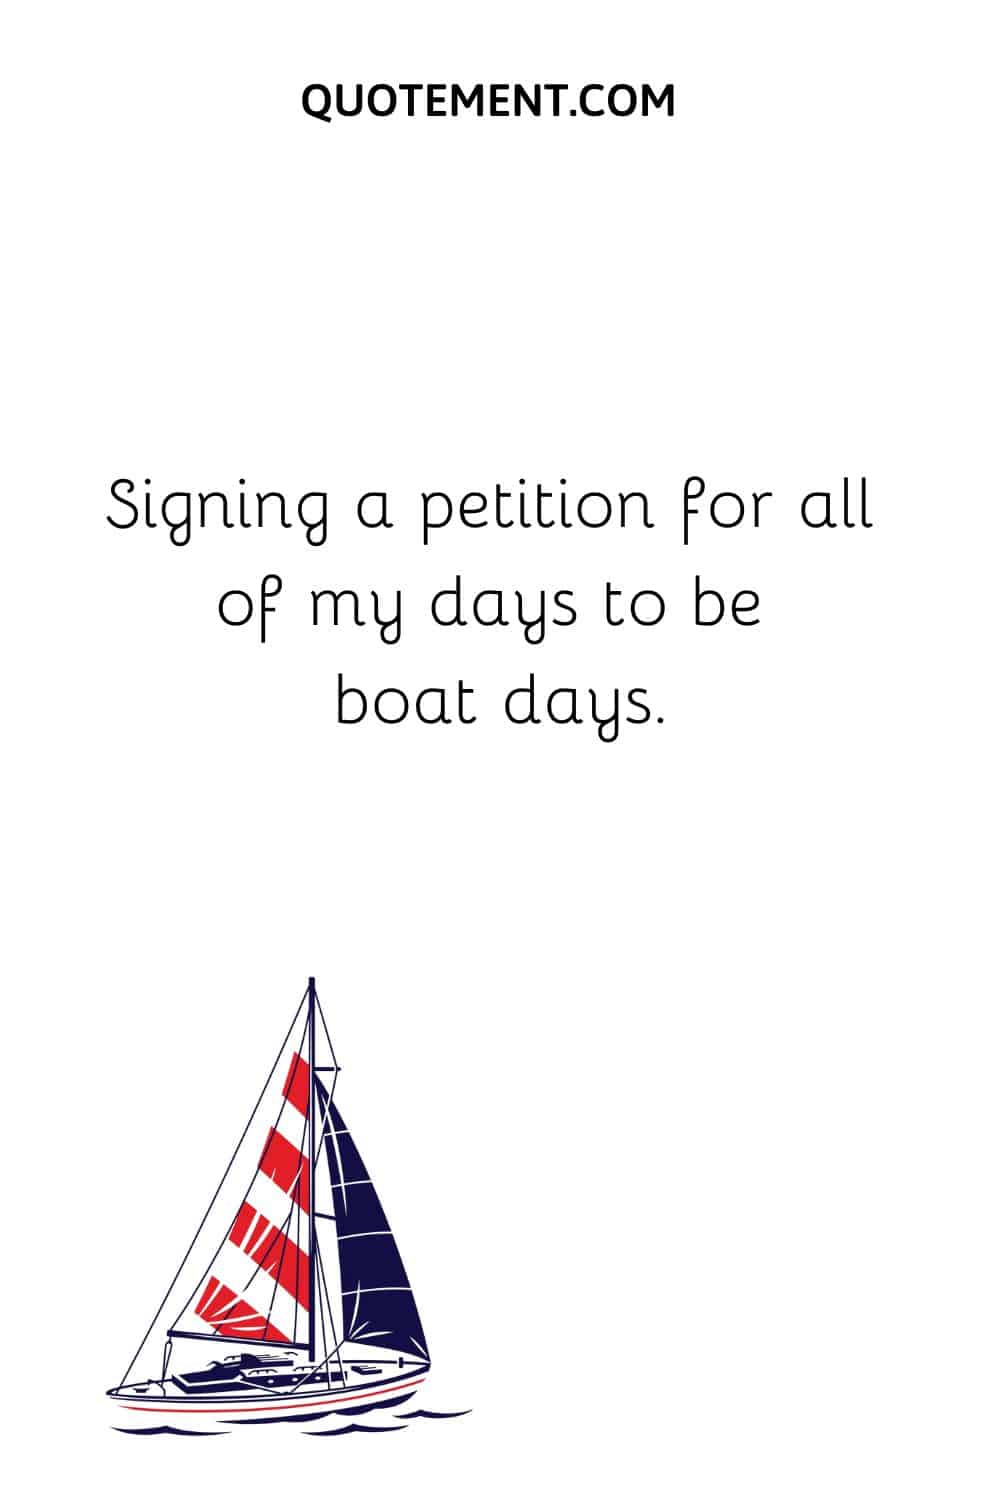 Signing a petition for all of my days to be boat days